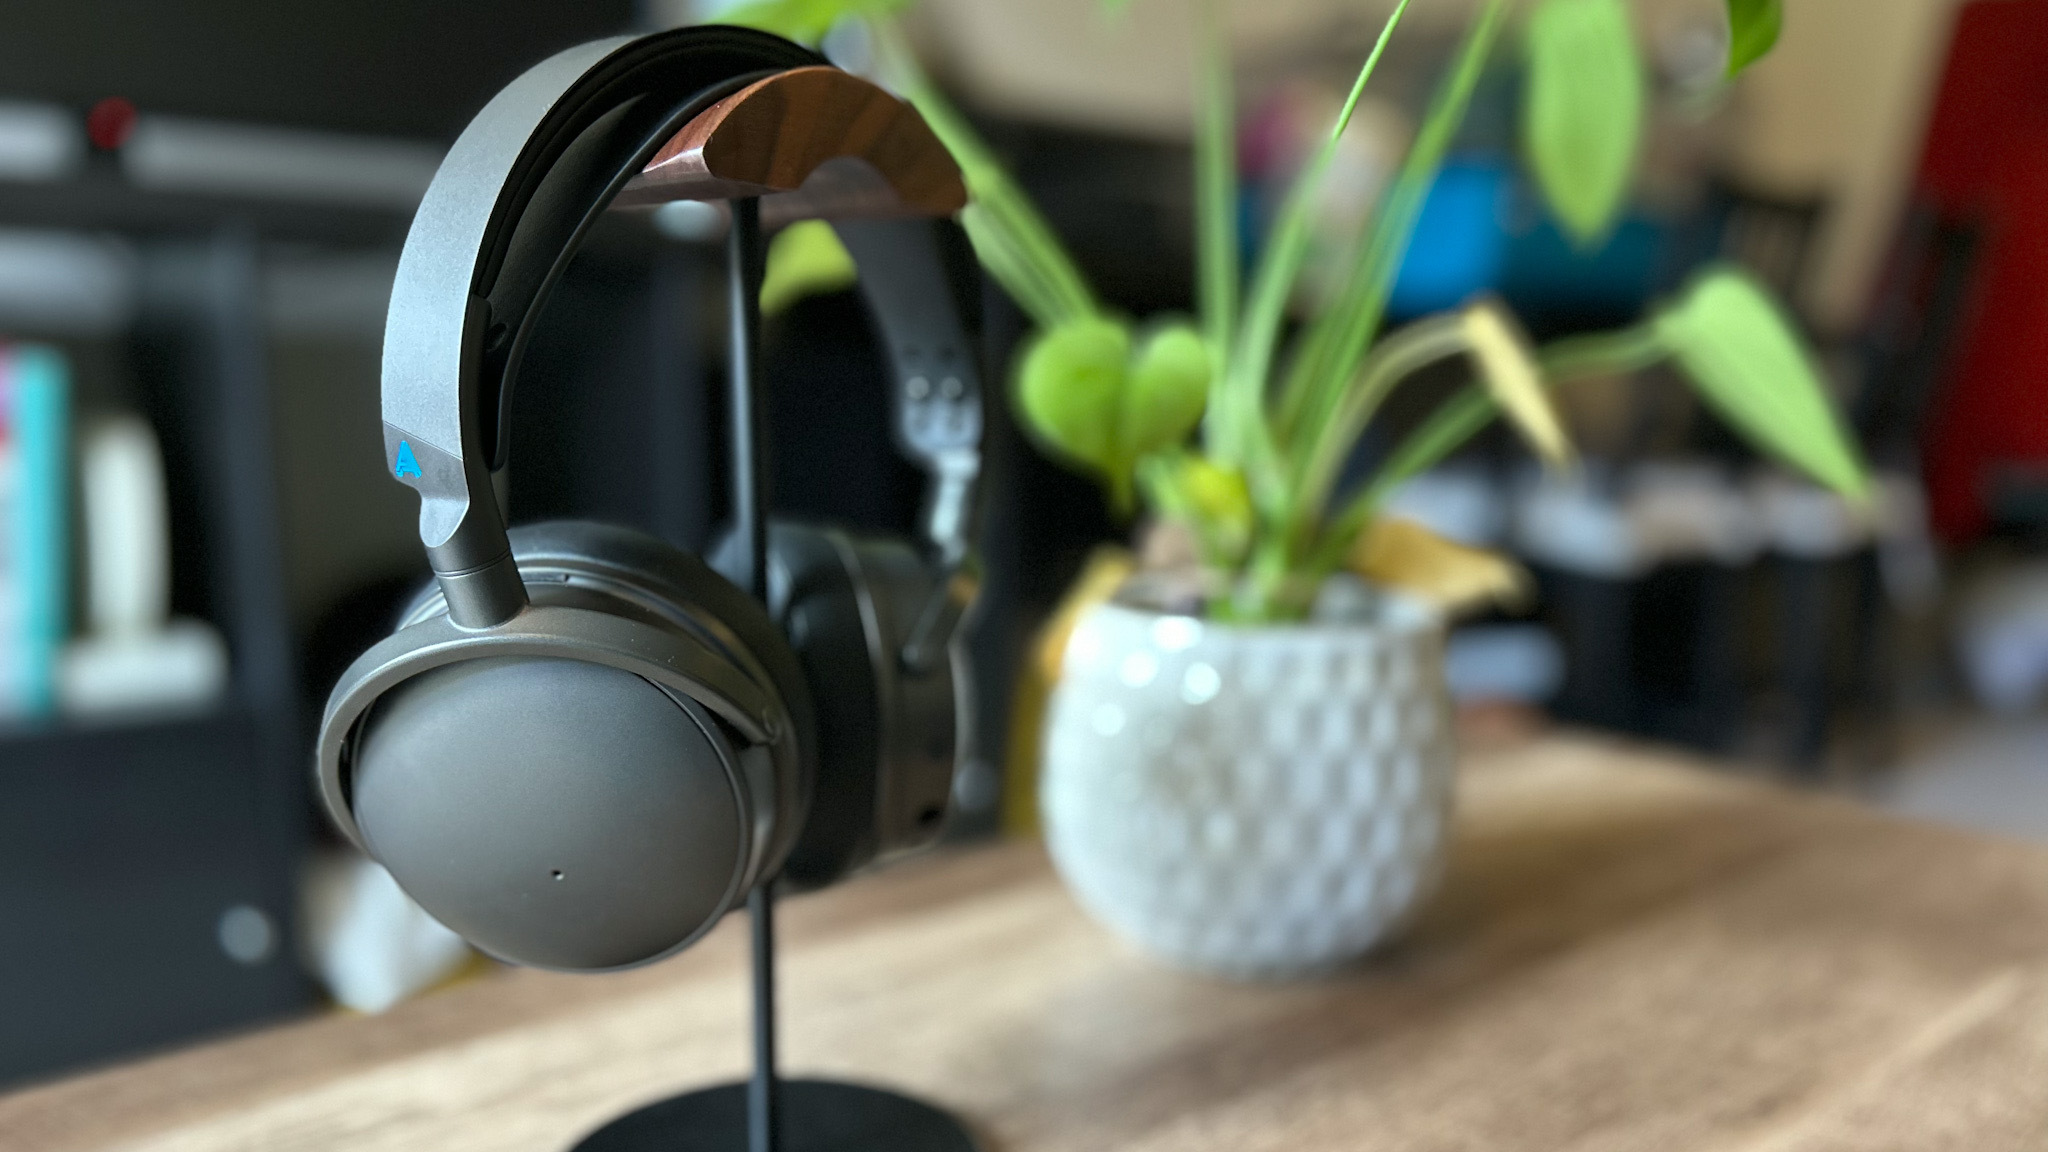 Remaster or Remake?  Audeze Maxwell Review – Bloom Audio